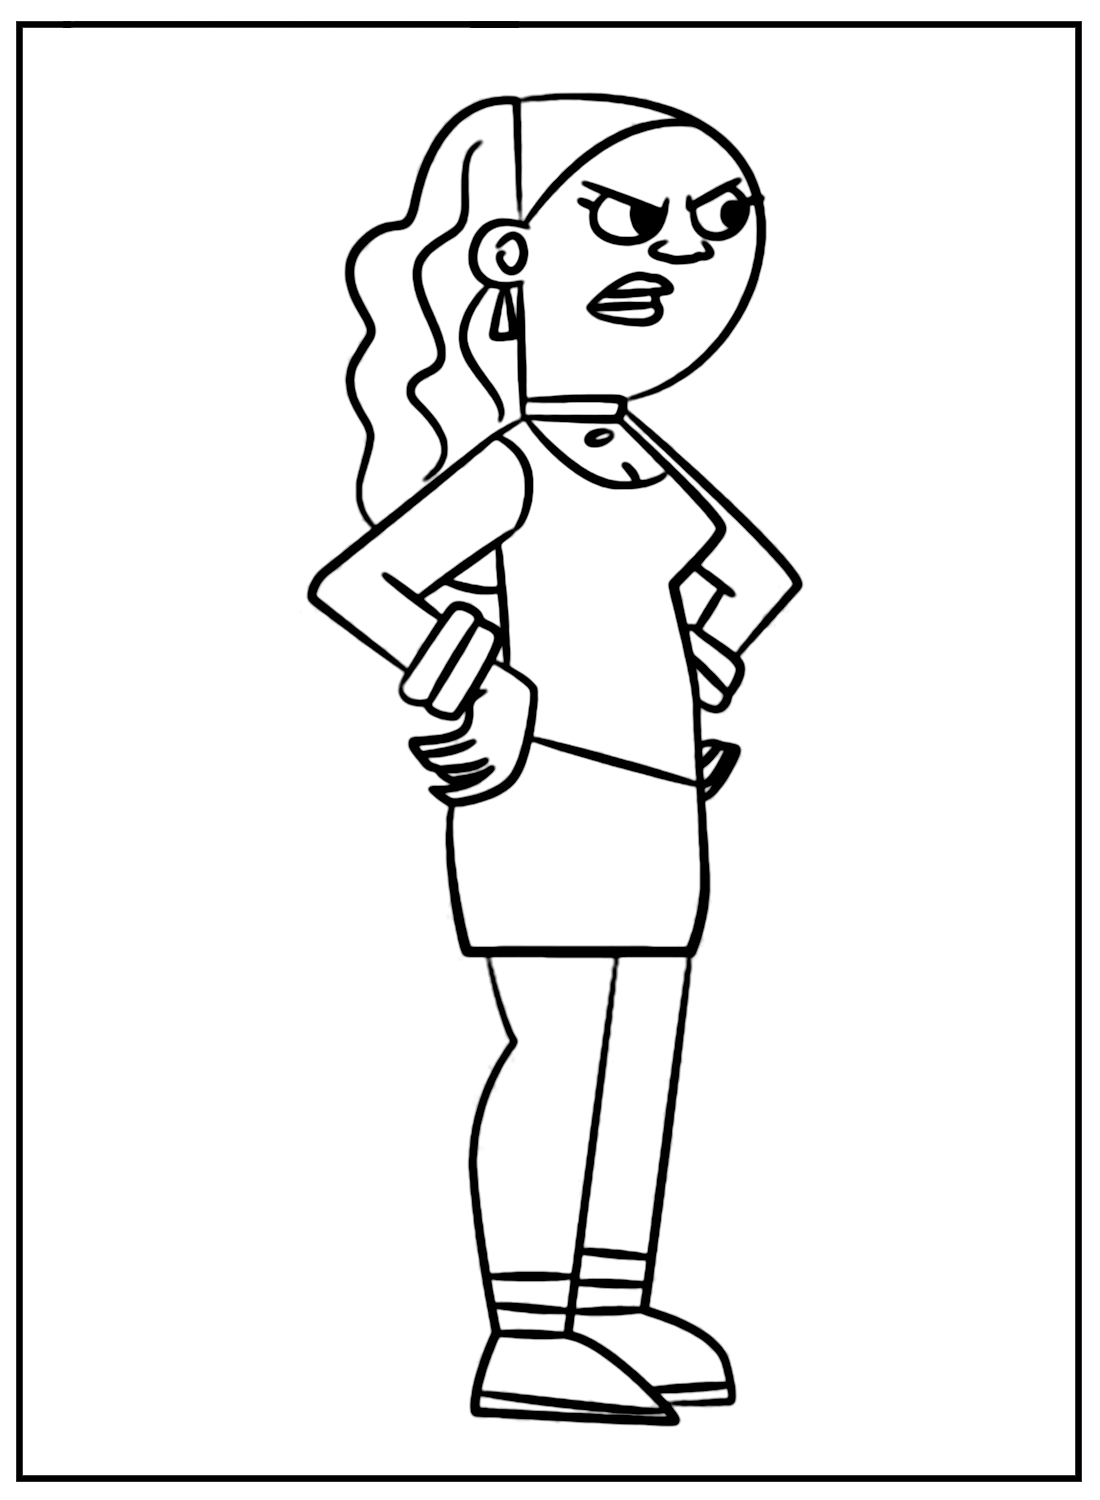 Valerie Gray Danny Phantom Coloring Pages